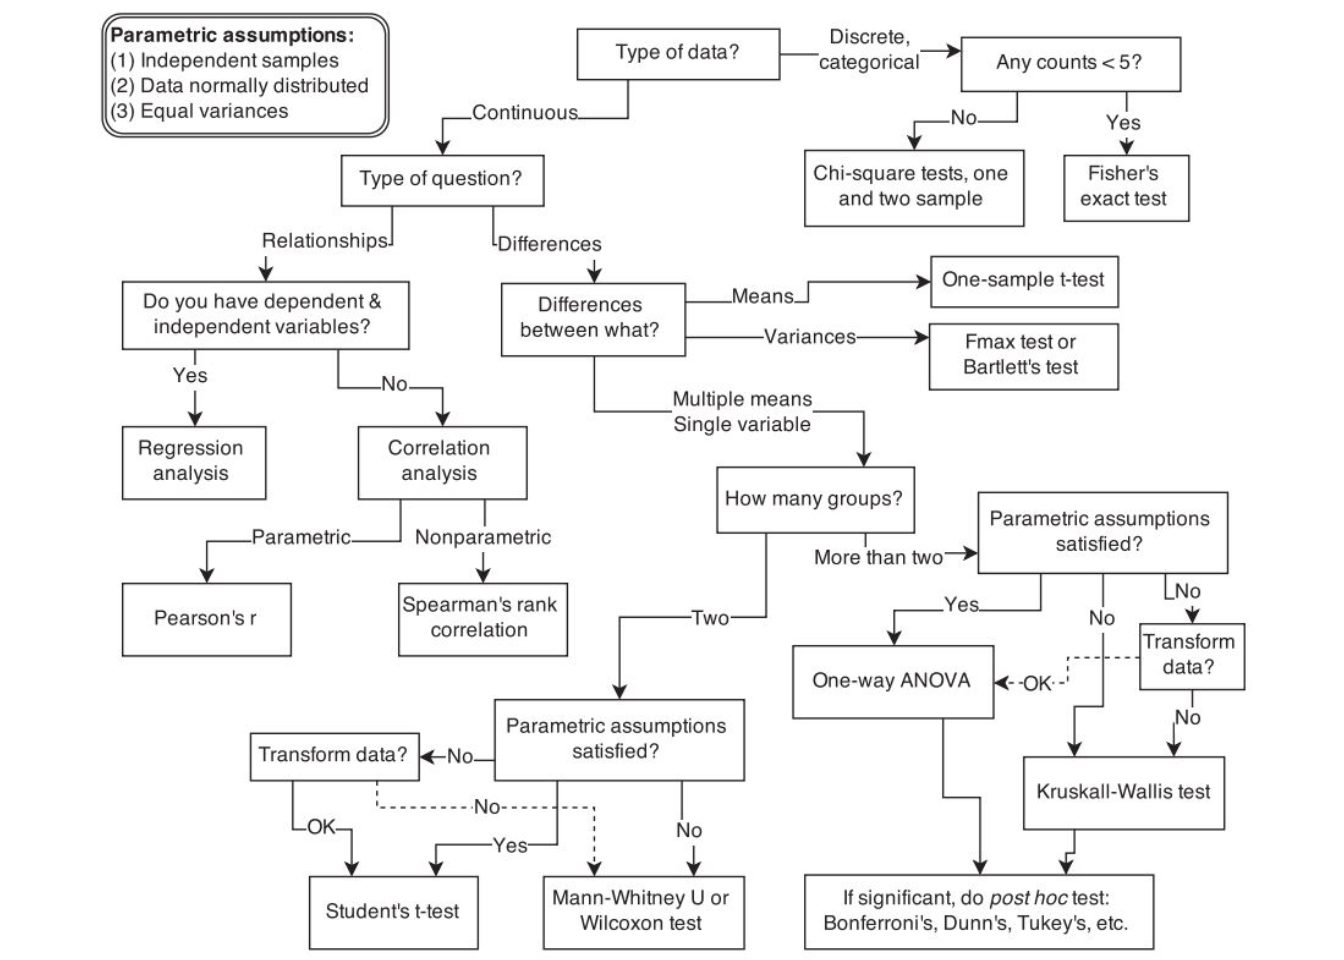 Flowchart for selecting an appropriate test (source: McElreath, R. (2016): Statistical Rethinking, p. 2)